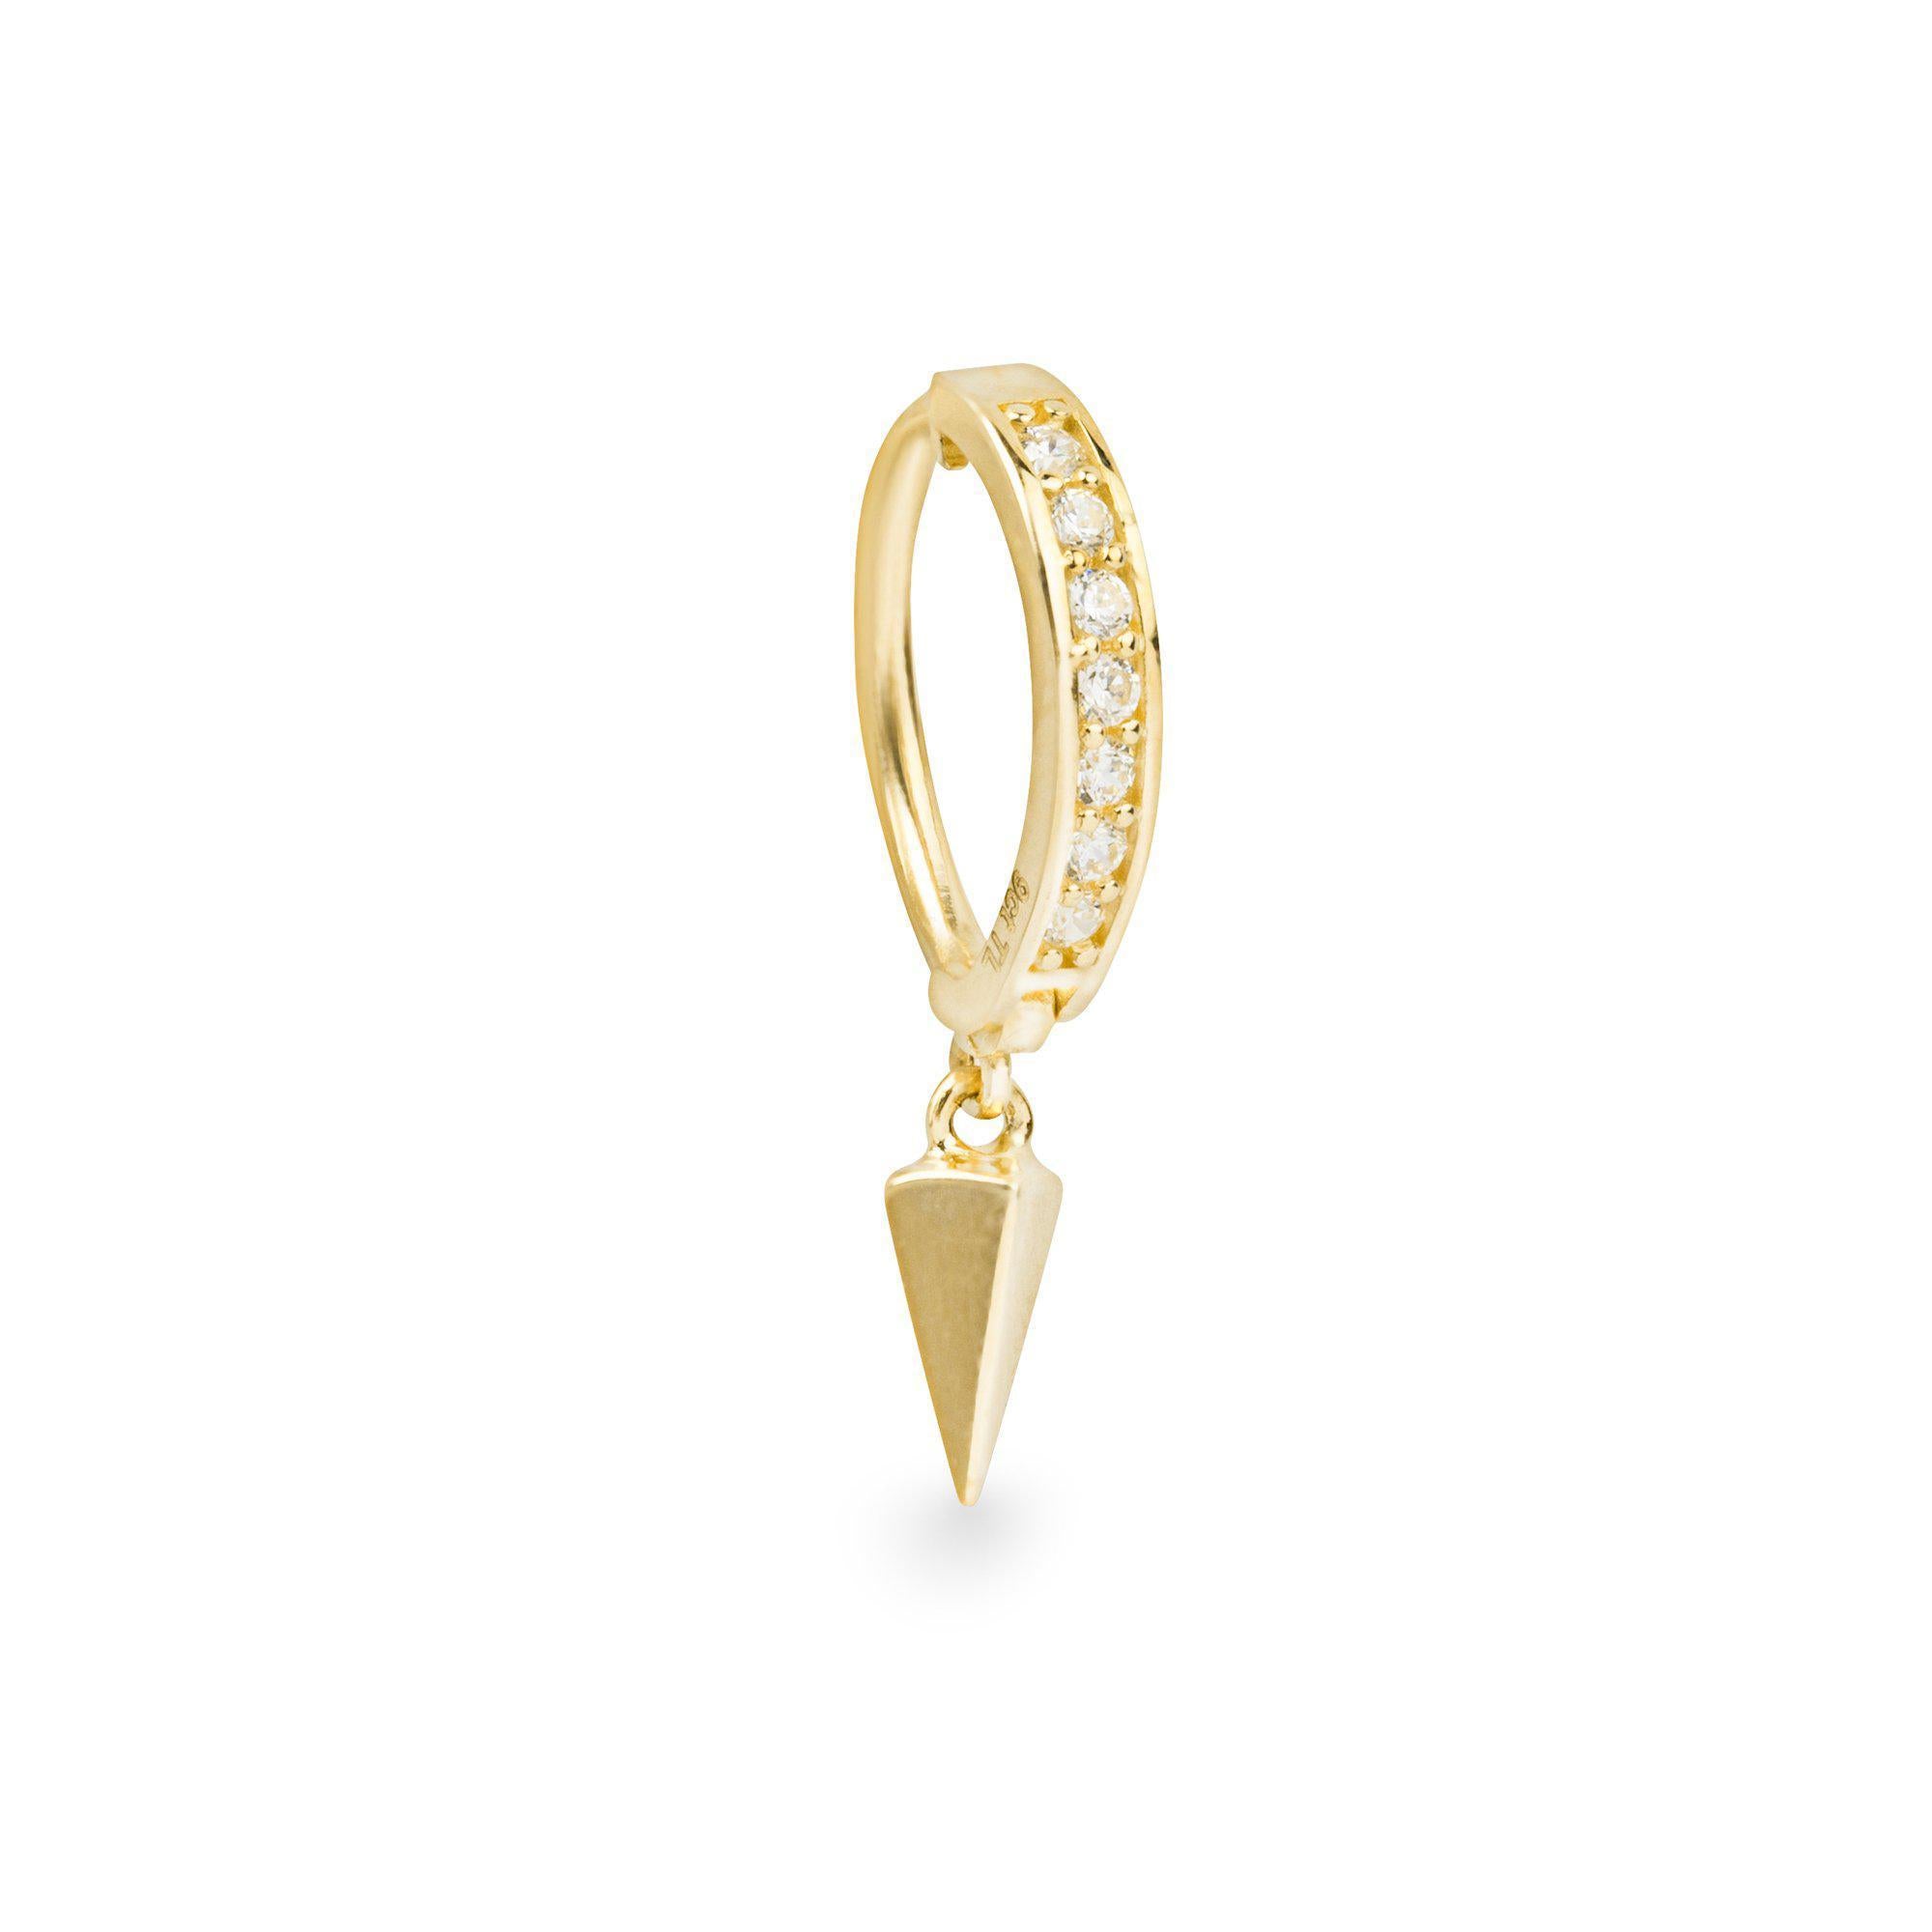 Punta 9k solid yellow gold pavé oval Rook single earring with inverted pyramid charm - Helix & Conch